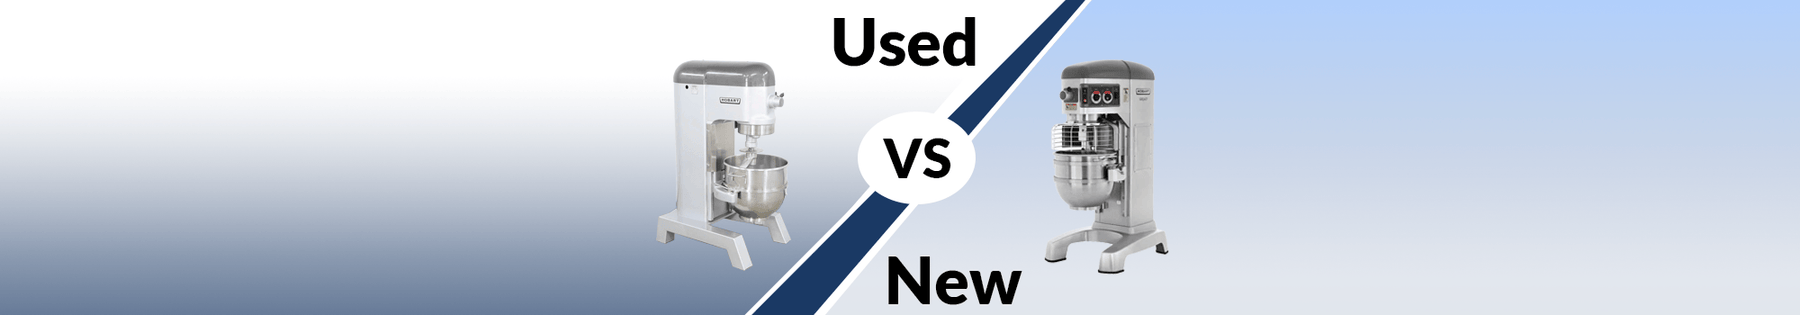 Used Hobart Commercial Mixers vs. New Hobart Commercial Mixers